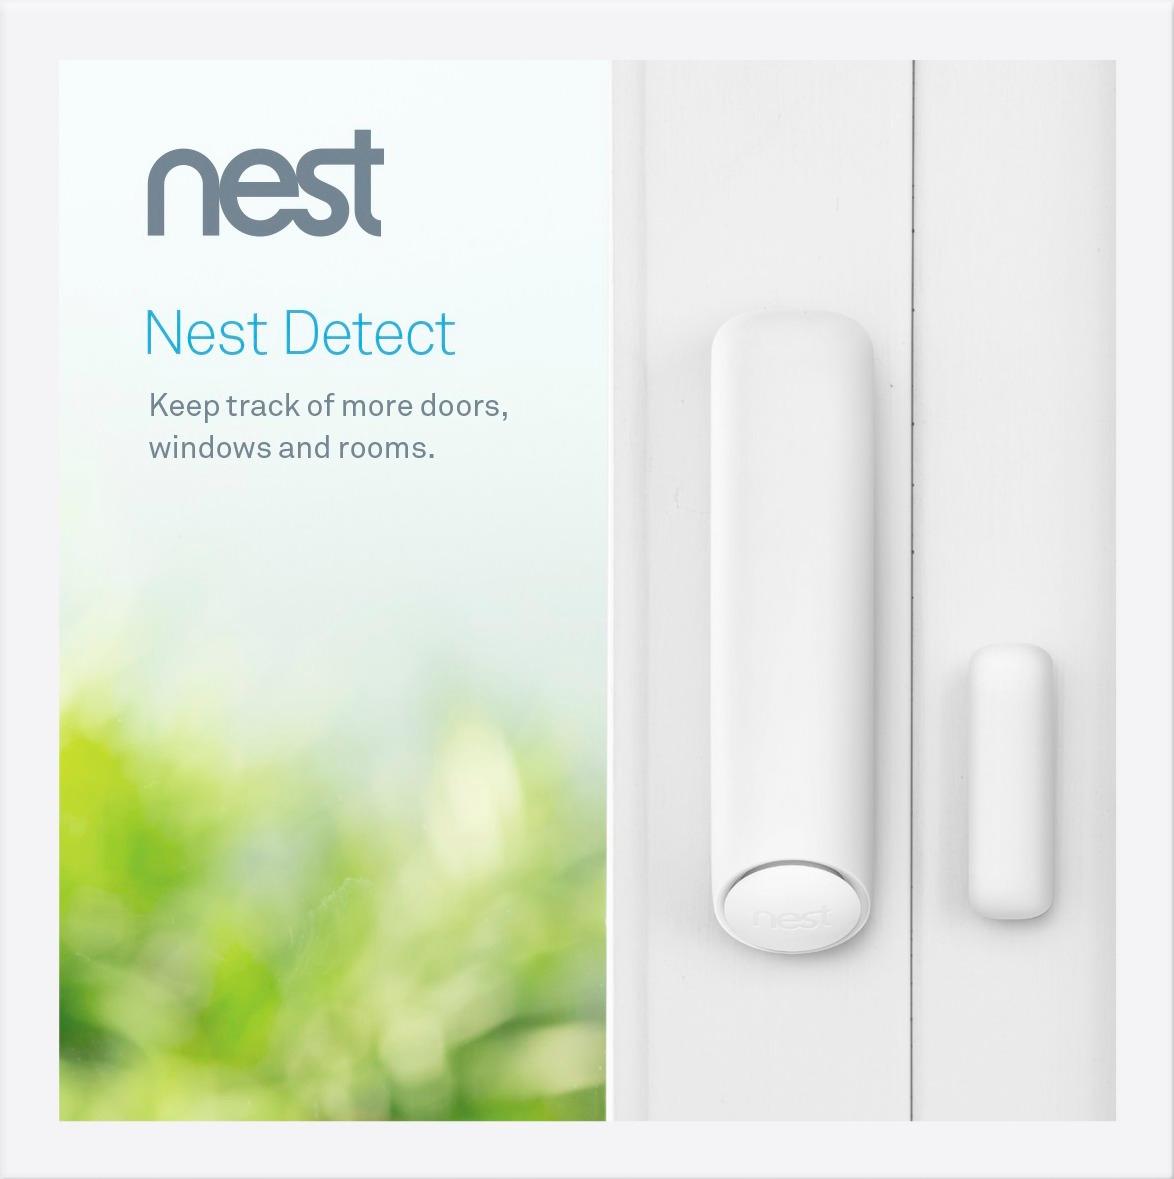 nest detects